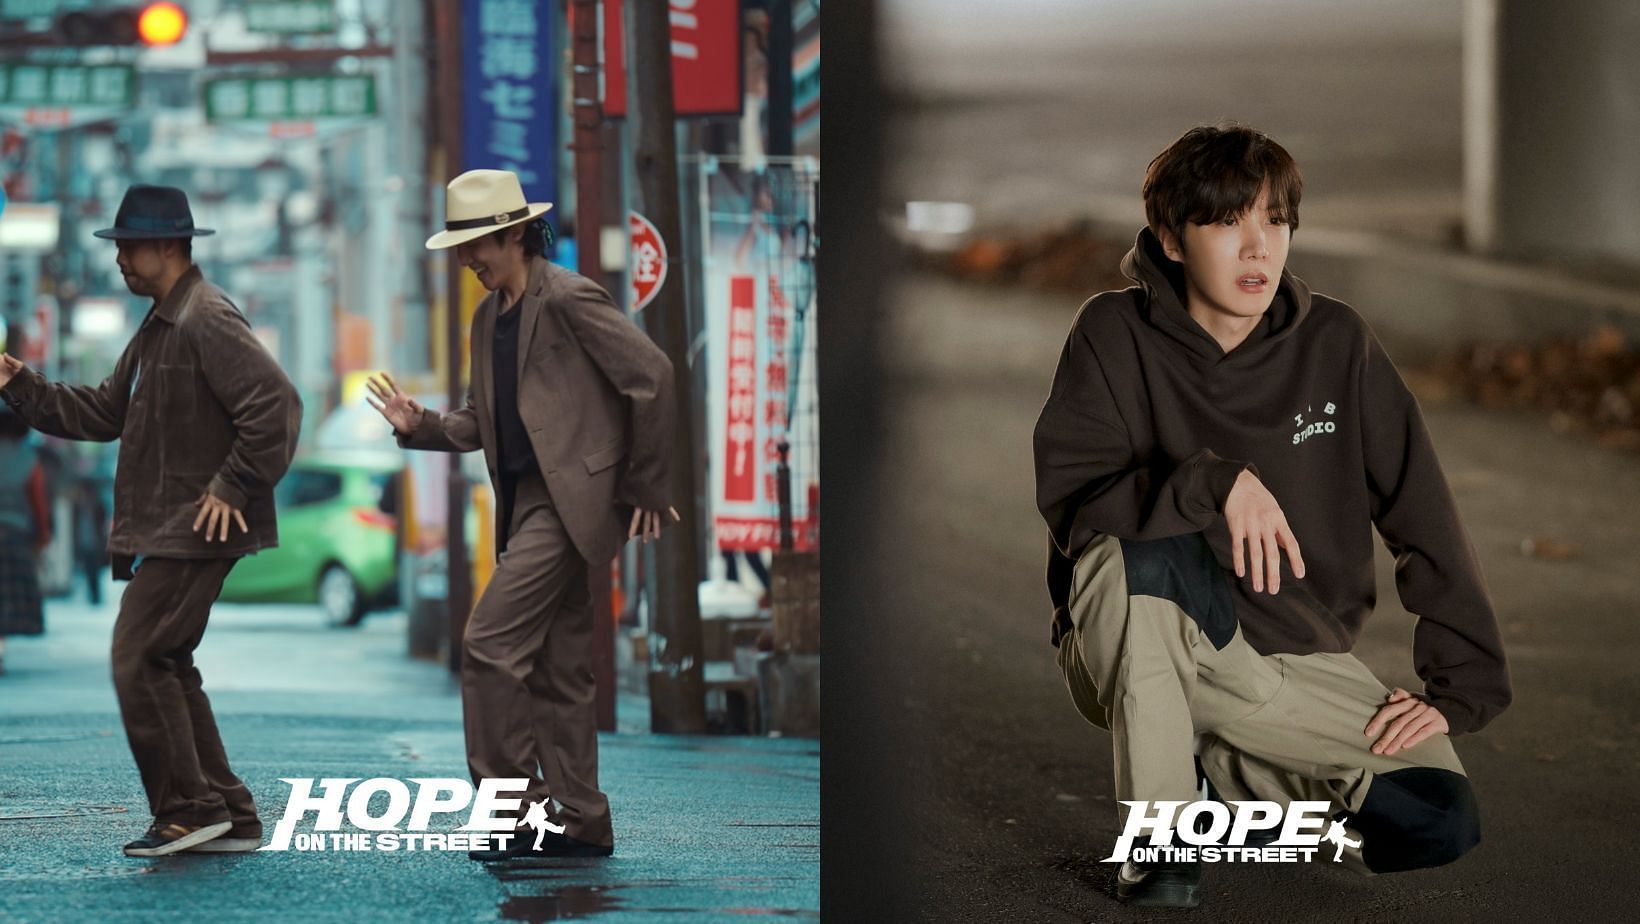 BTS&rsquo; J-Hope reported to have paid in full for the events at the &lsquo;HOPE ON THE STREET VOL.1&rsquo; U.S. listening party. (Images via X/@bts_bighit)